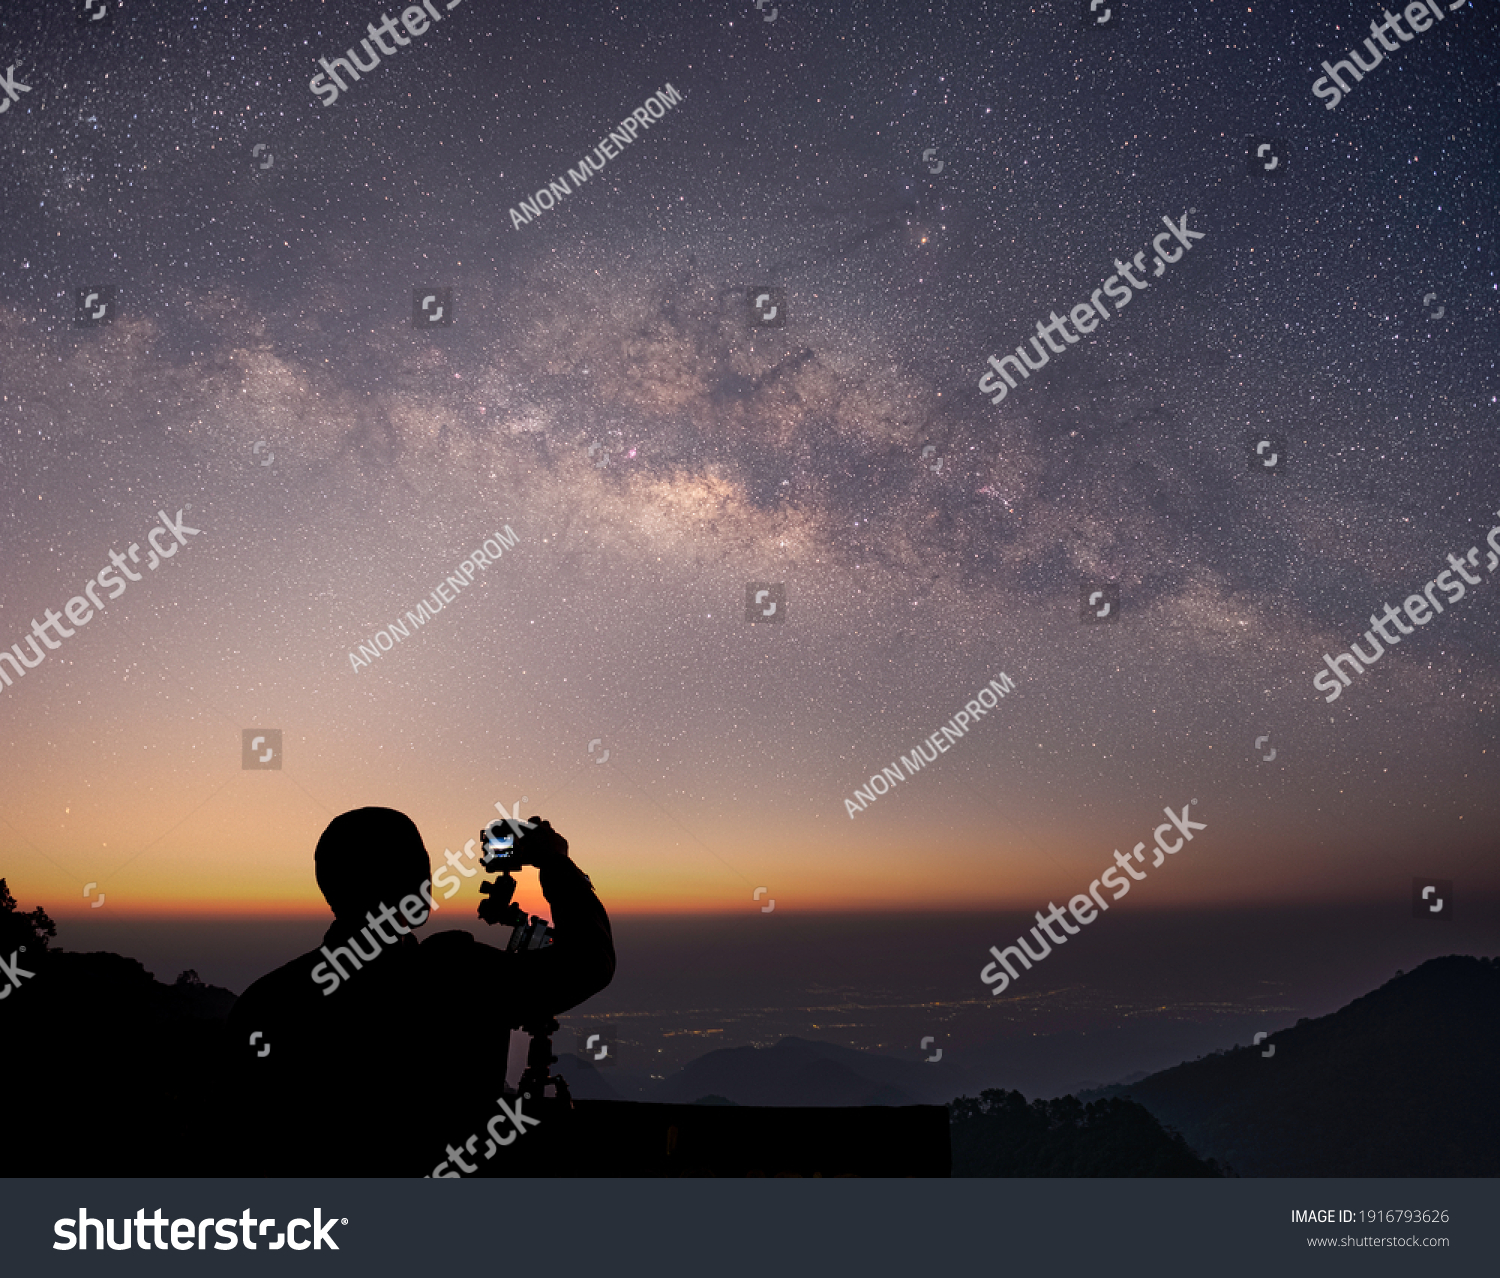 The stars and the milky way in the dark night sky are very beautiful. #1916793626